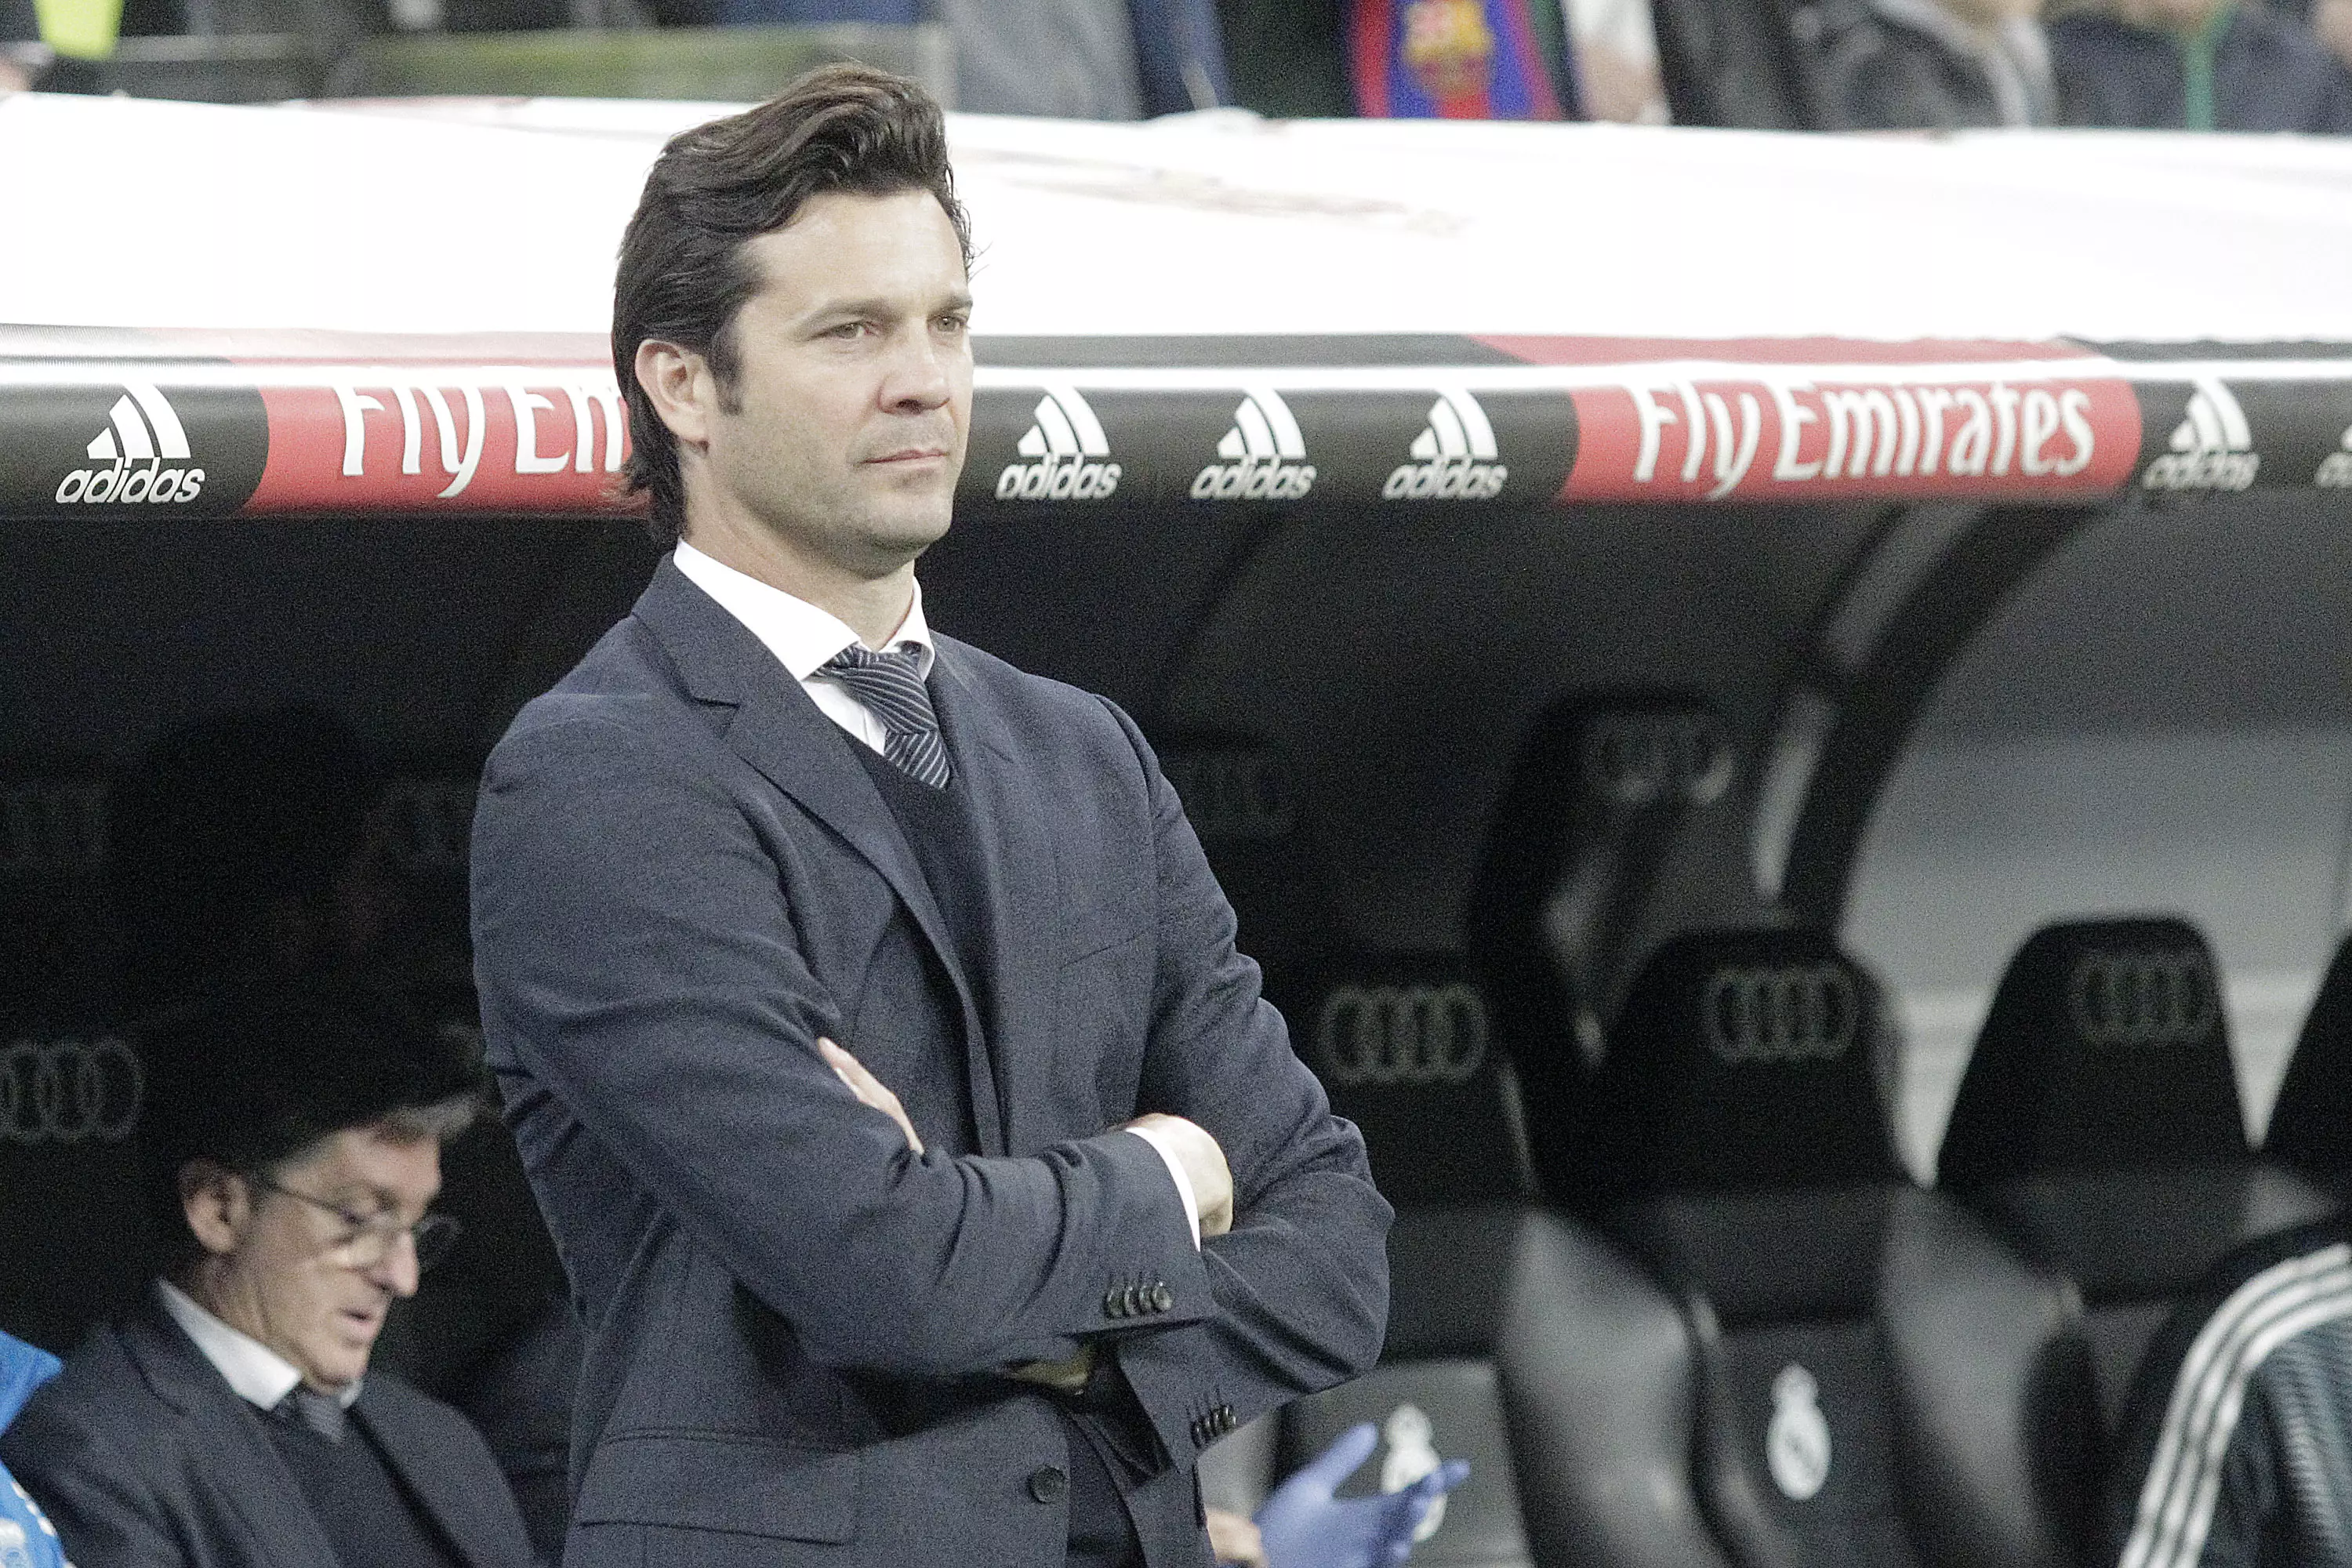 Solari saw his tenure as Real Madrid boss end after the Ajax defeat. (Image